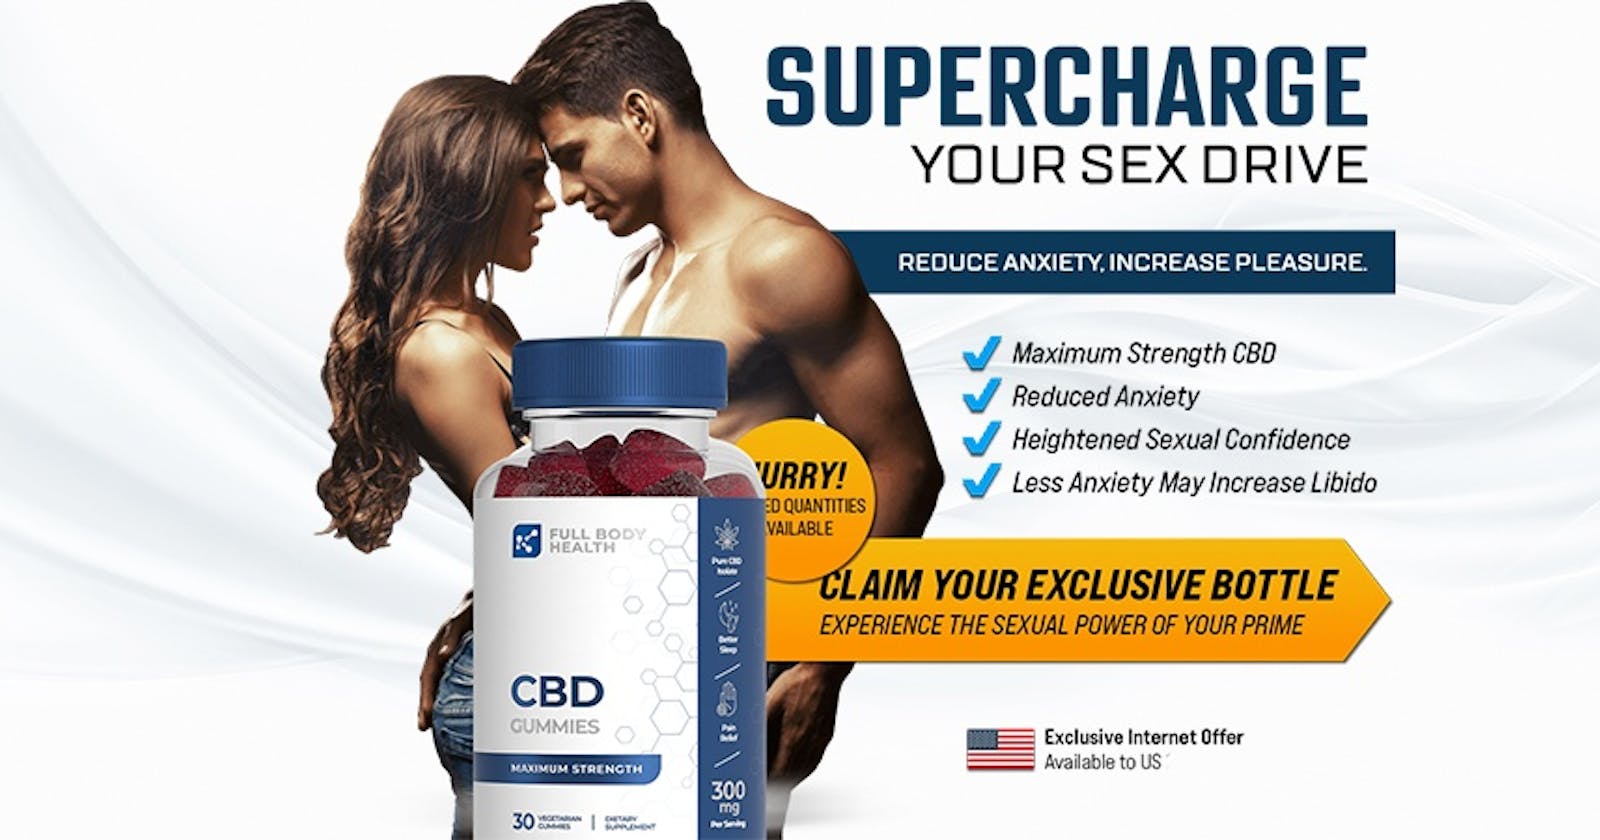 Full Body CBD Gummies For ED *#1 SEX DRIVE BOOSTER* 100% Safe To Use Legit Or Scam?